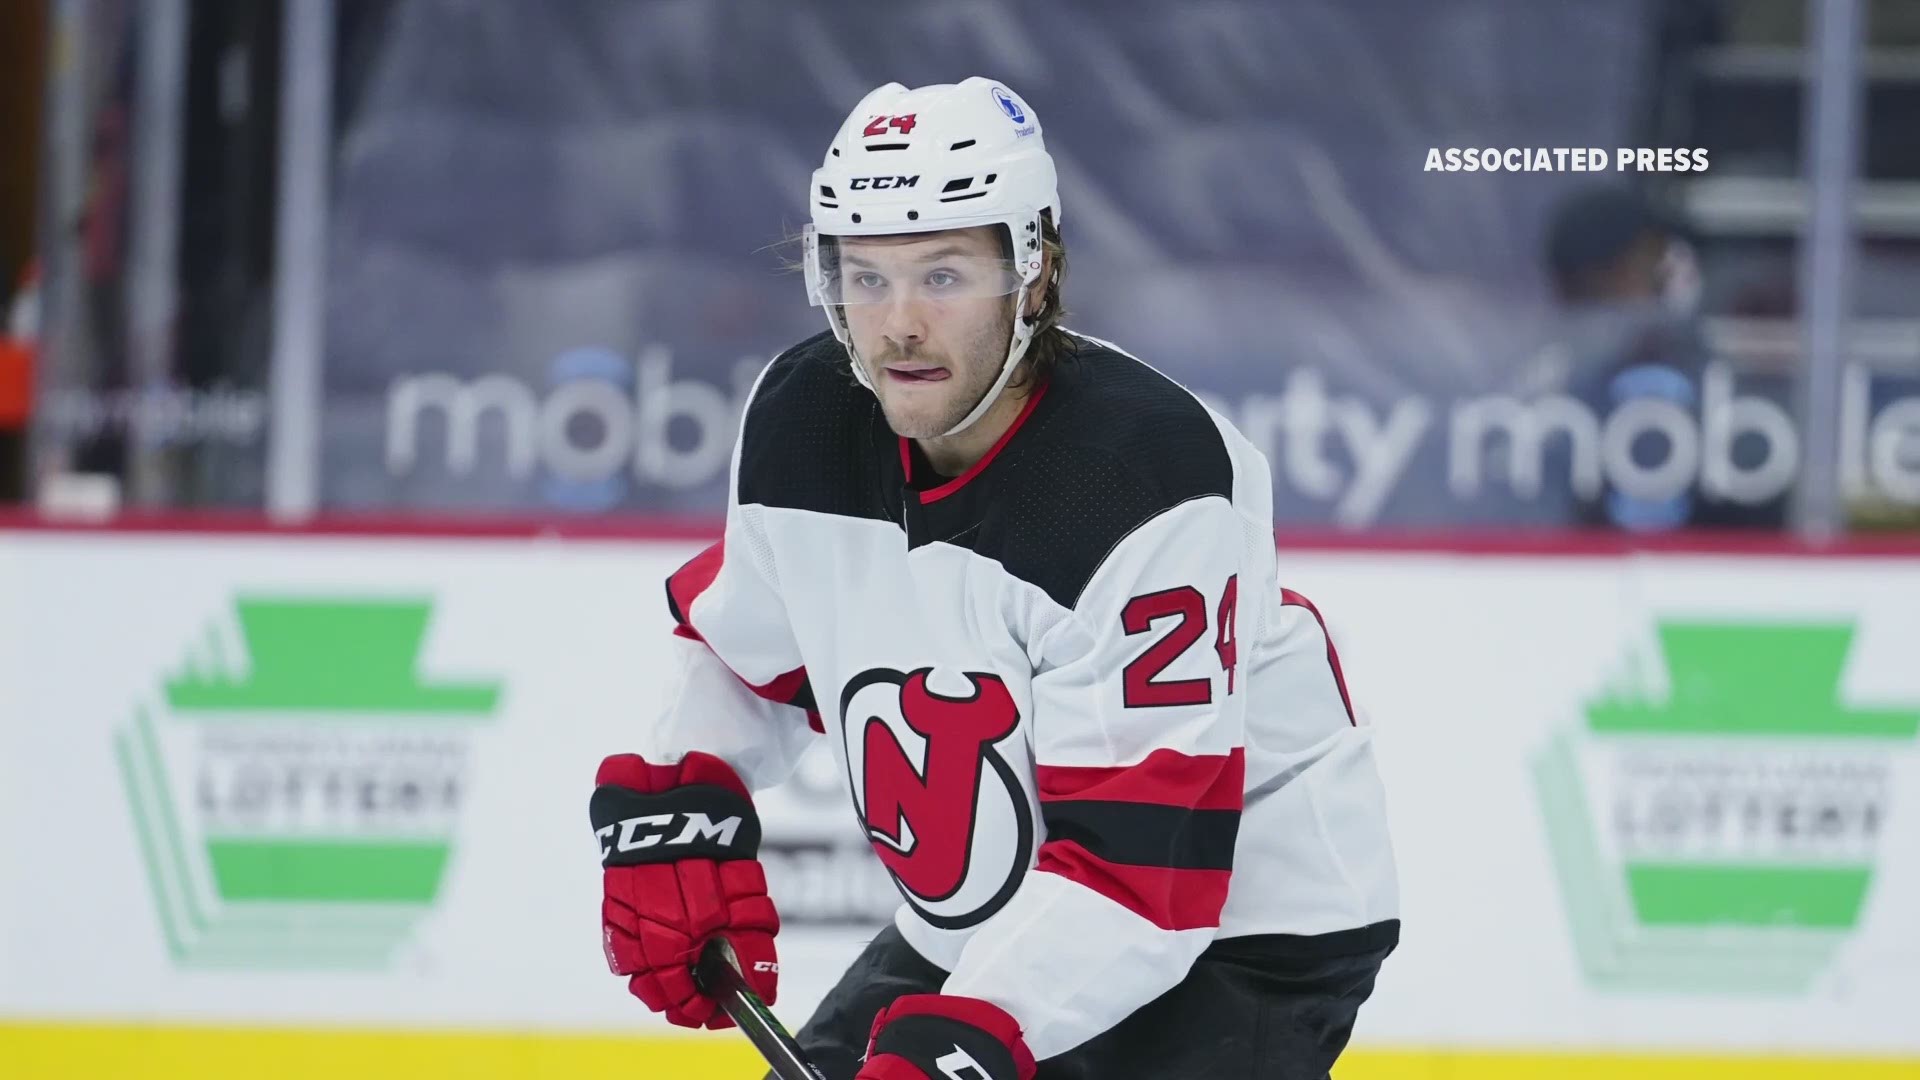 "That's what you strive to accomplish," Smith told KREM 2 about the honors he earned playing with the New Jersey Devils.